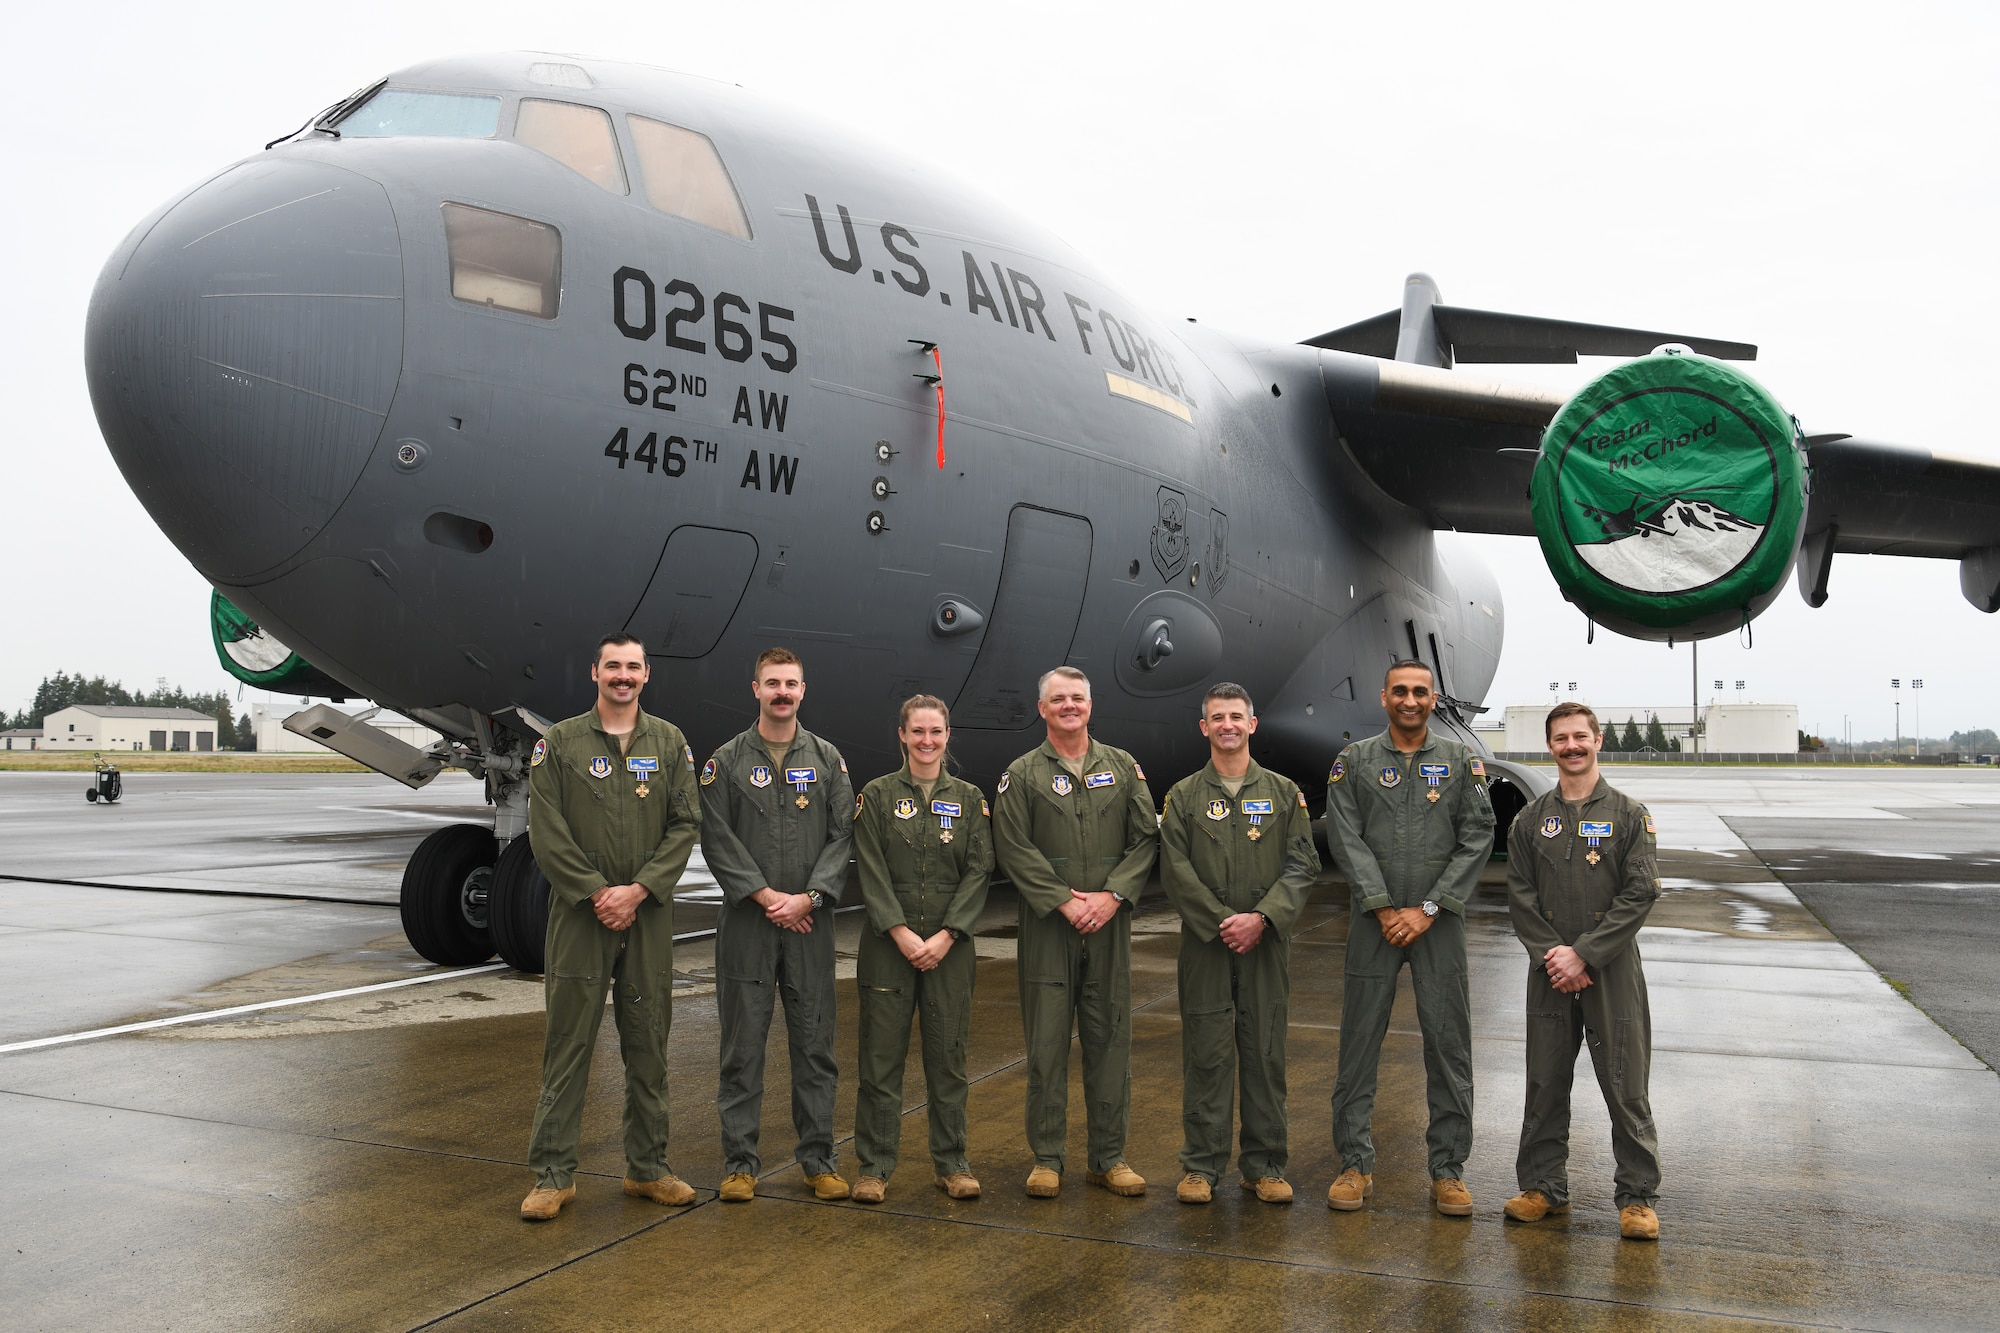 A group of people in flight suits standing in front of a C-17 Globemaster III.